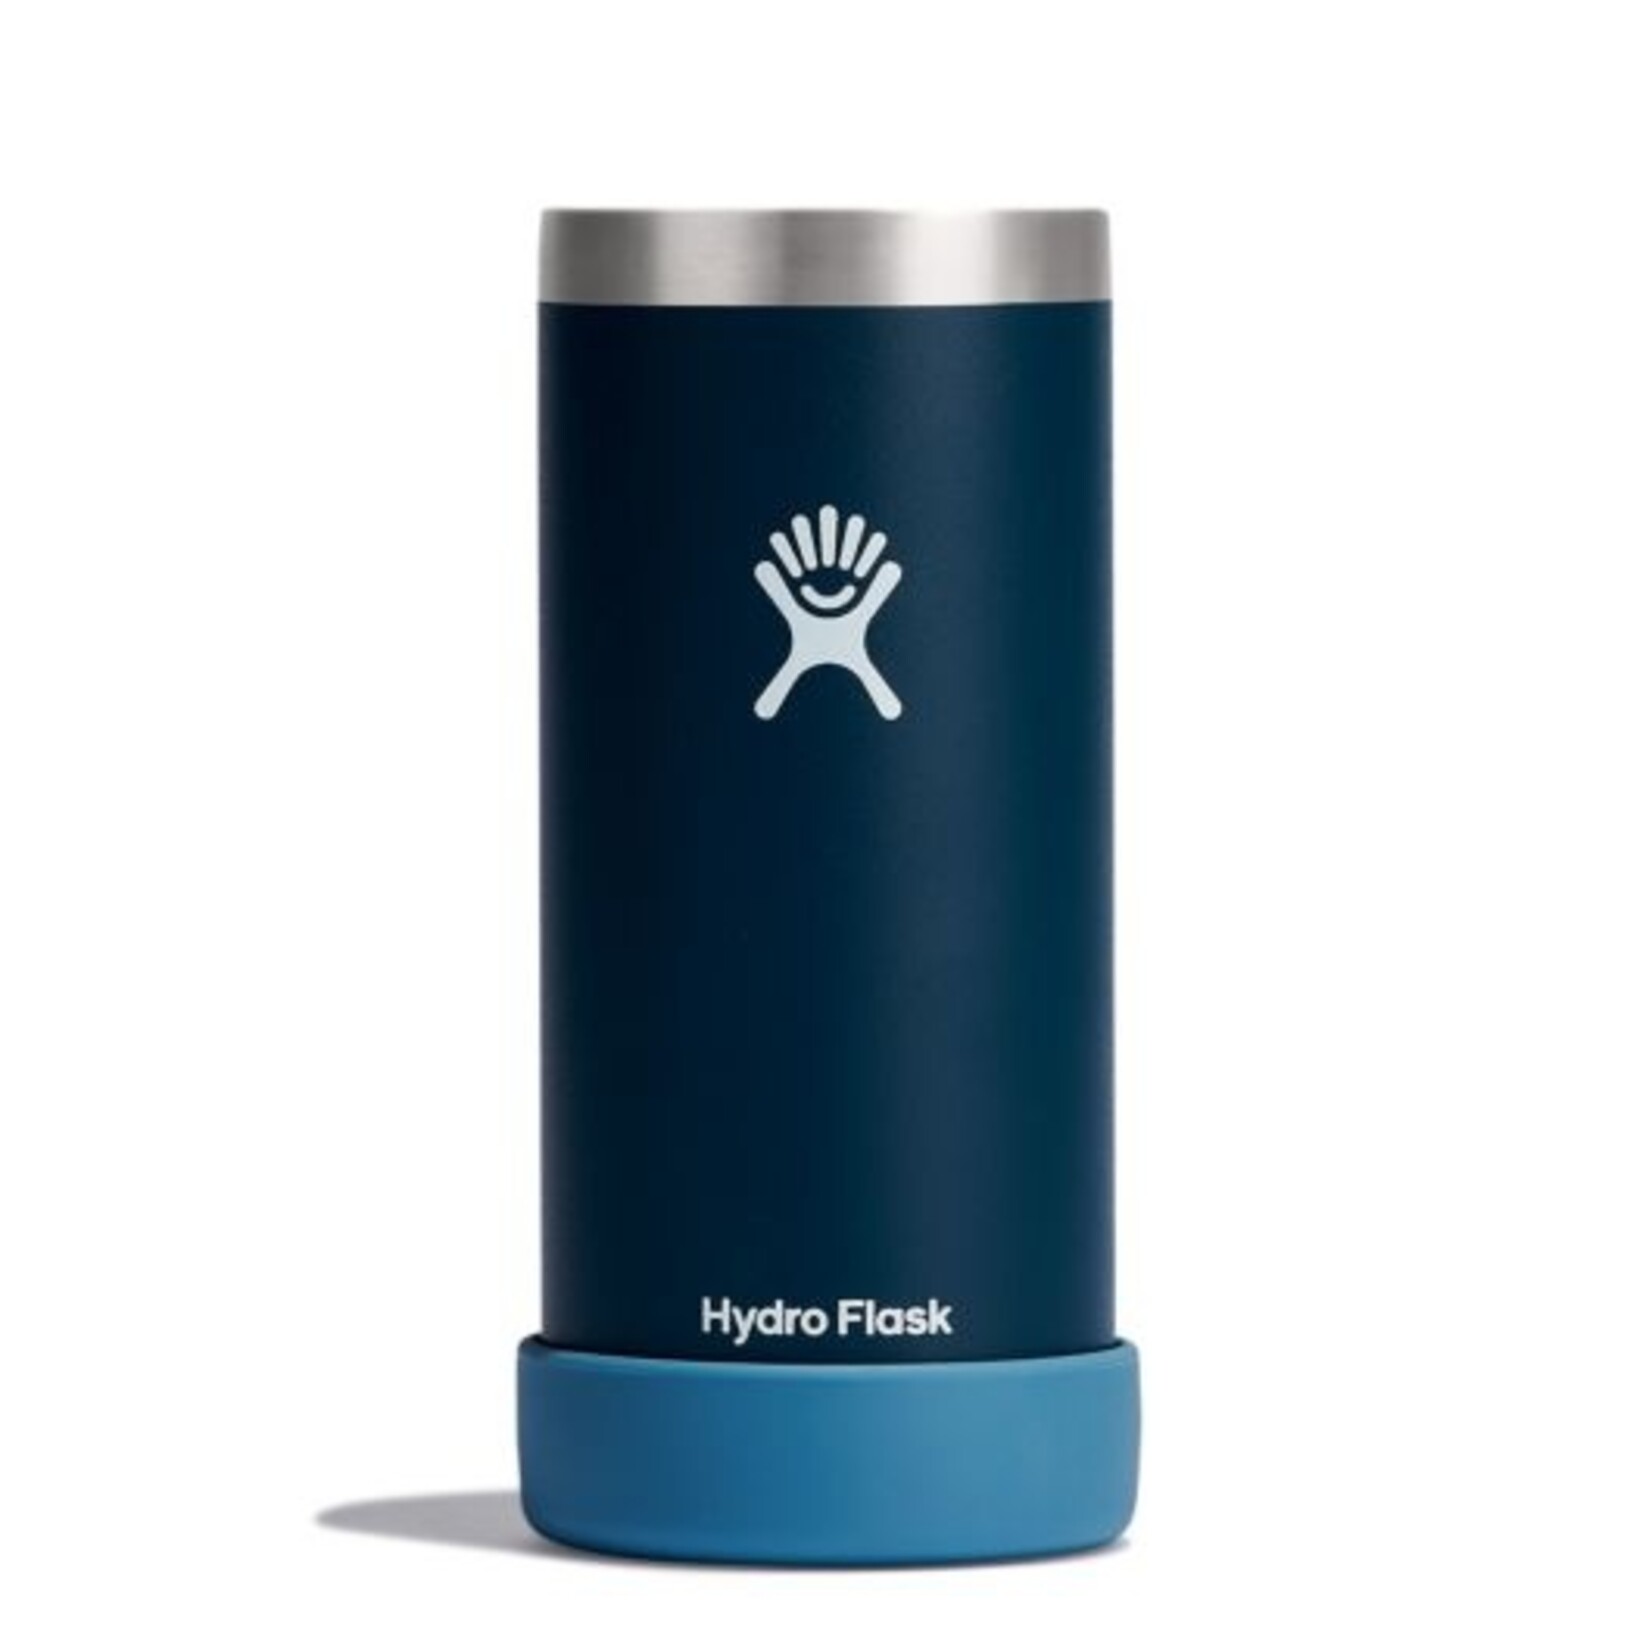 Hydro Flask 12oz slim cooler cup